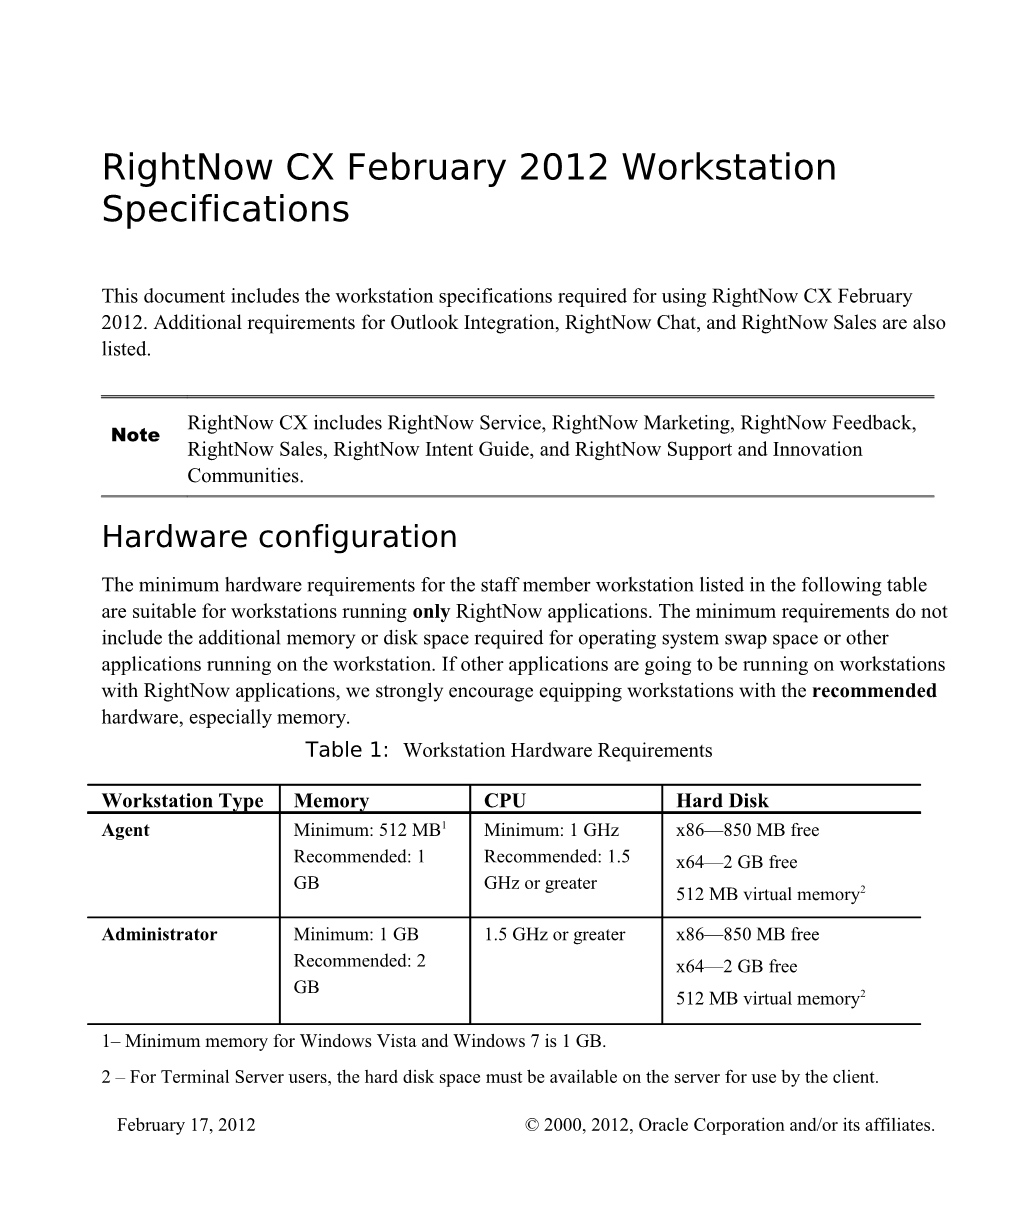 Rightnow CX February 2012 Workstation Specifications